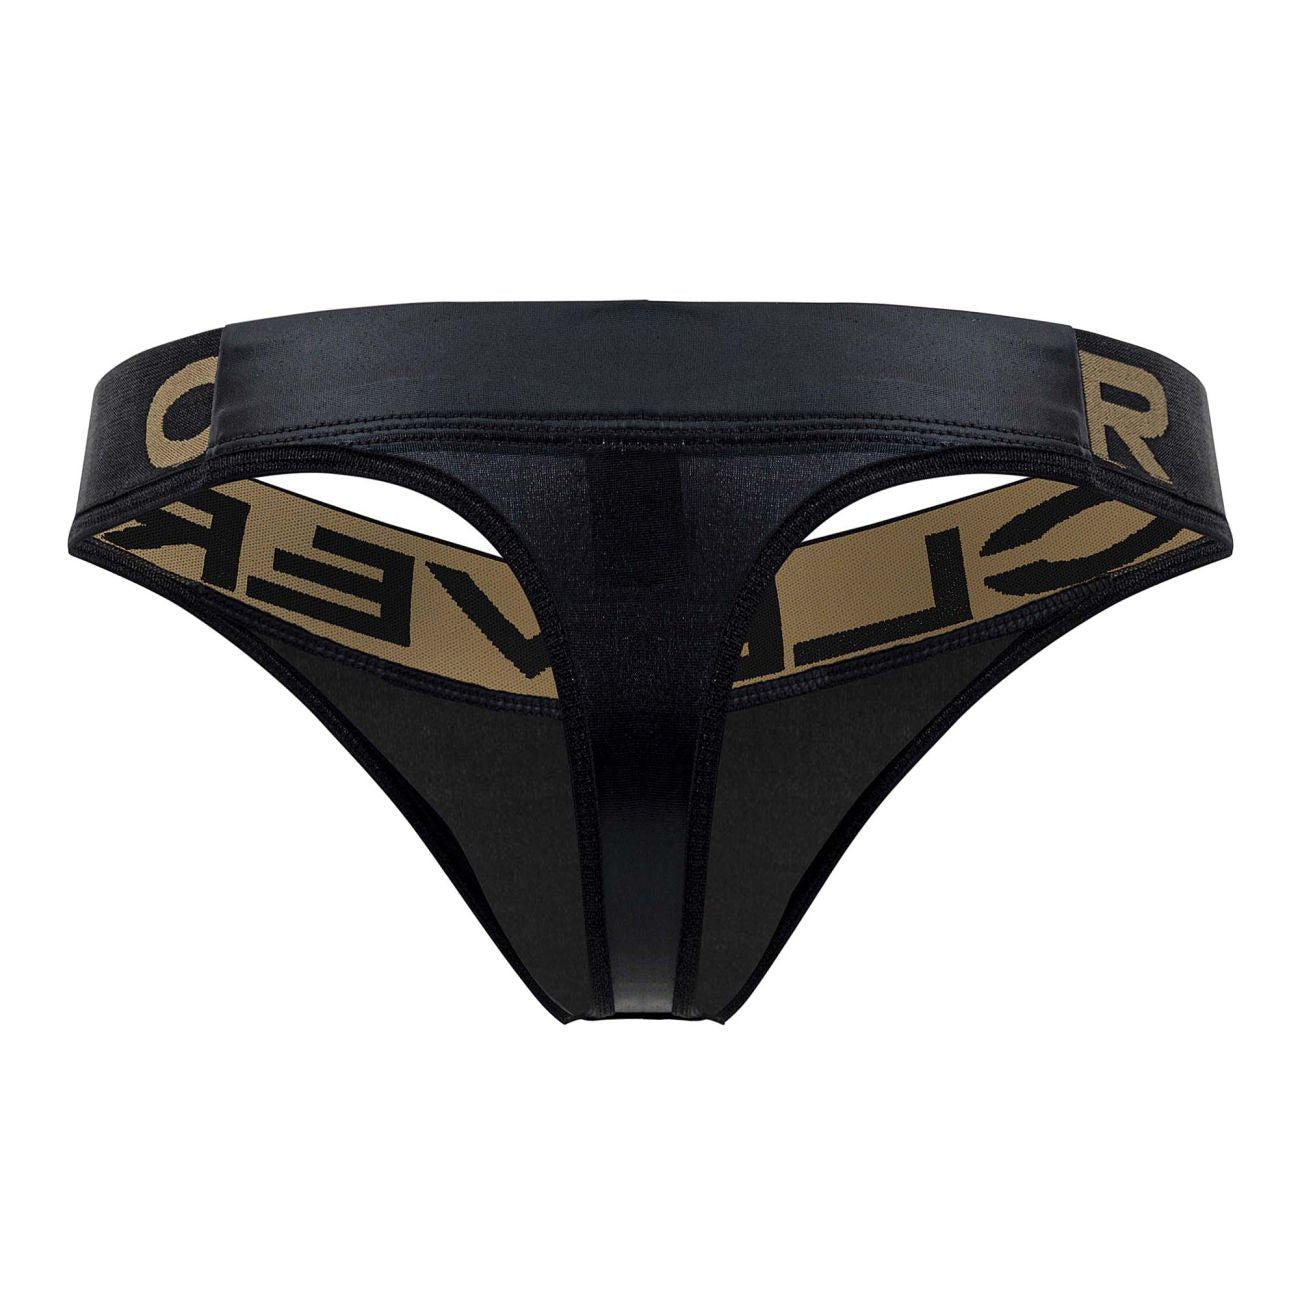 Clever 1410 Earth Thongs Black